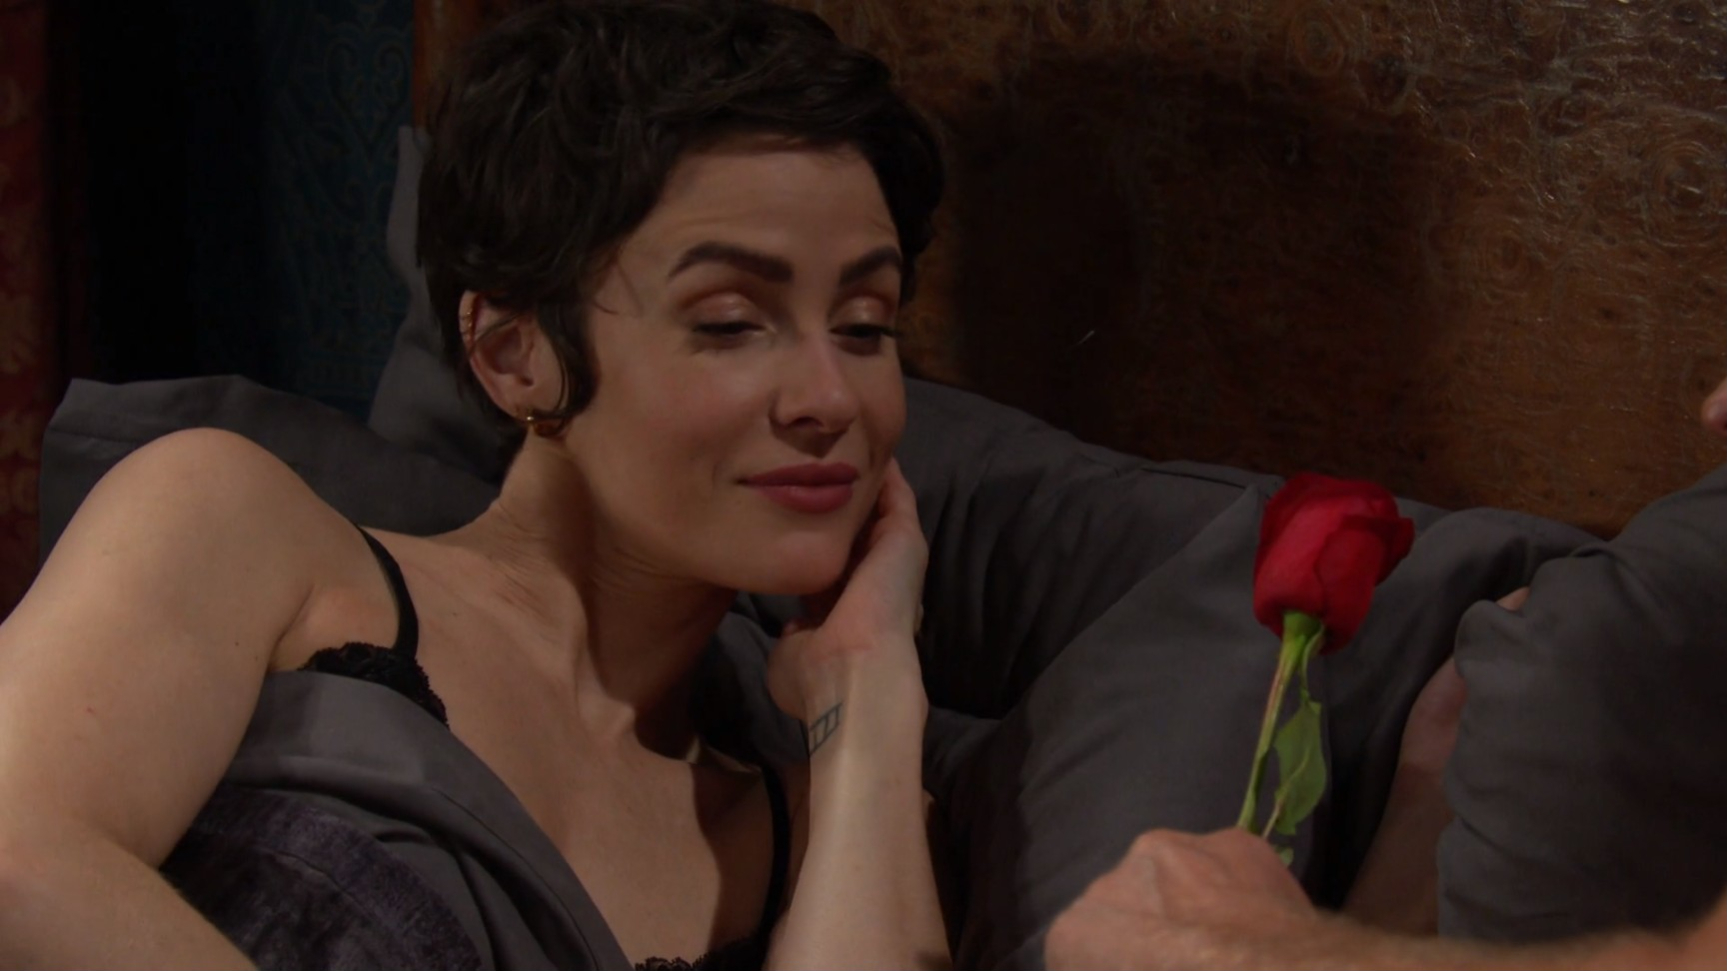 sarah gets rose valentines day Days of our Lives recaps